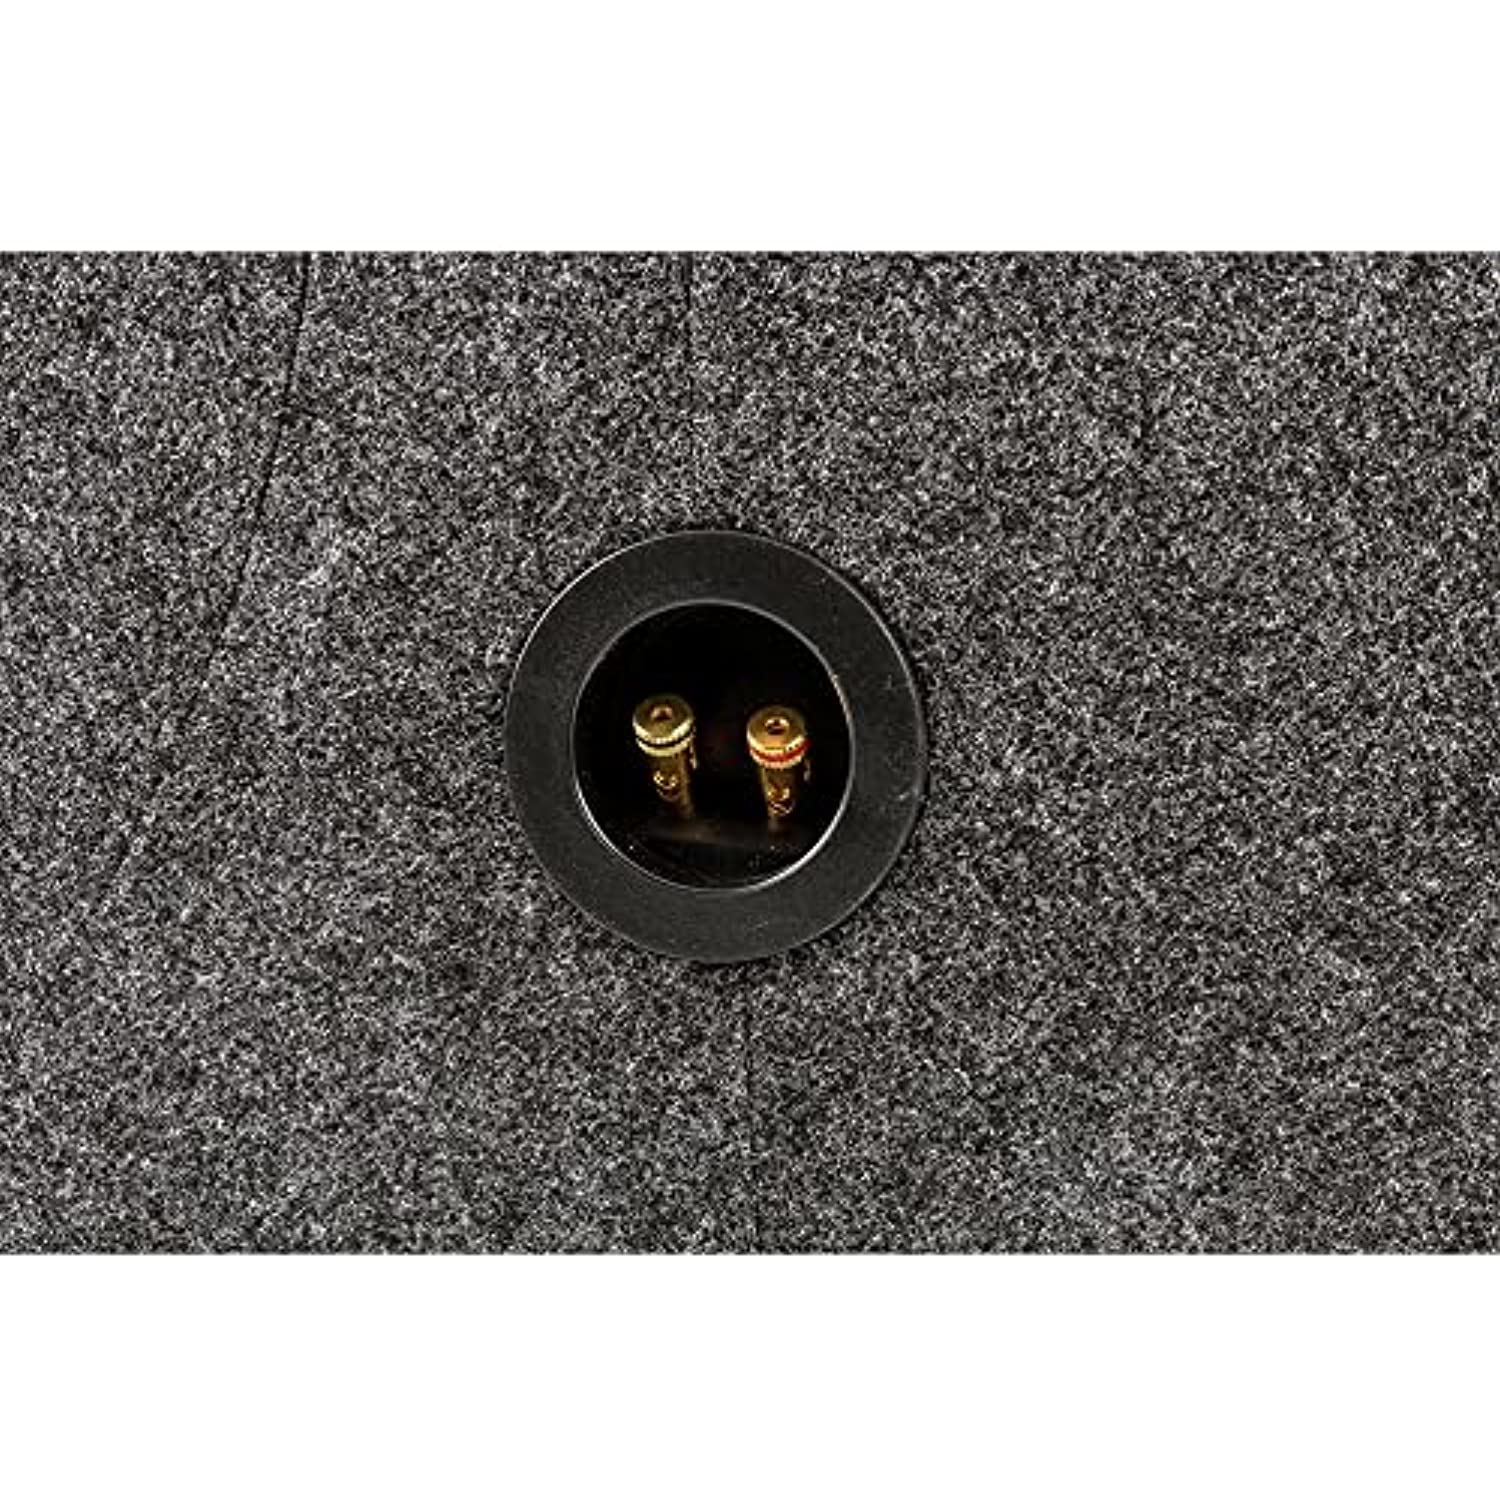 QPower 12 Inch Heavy-Duty Single Sealed Carpet Covered Durable Car Audio Vehicle Subwoofer Enclosure Woofer Box, Charcoal Gray